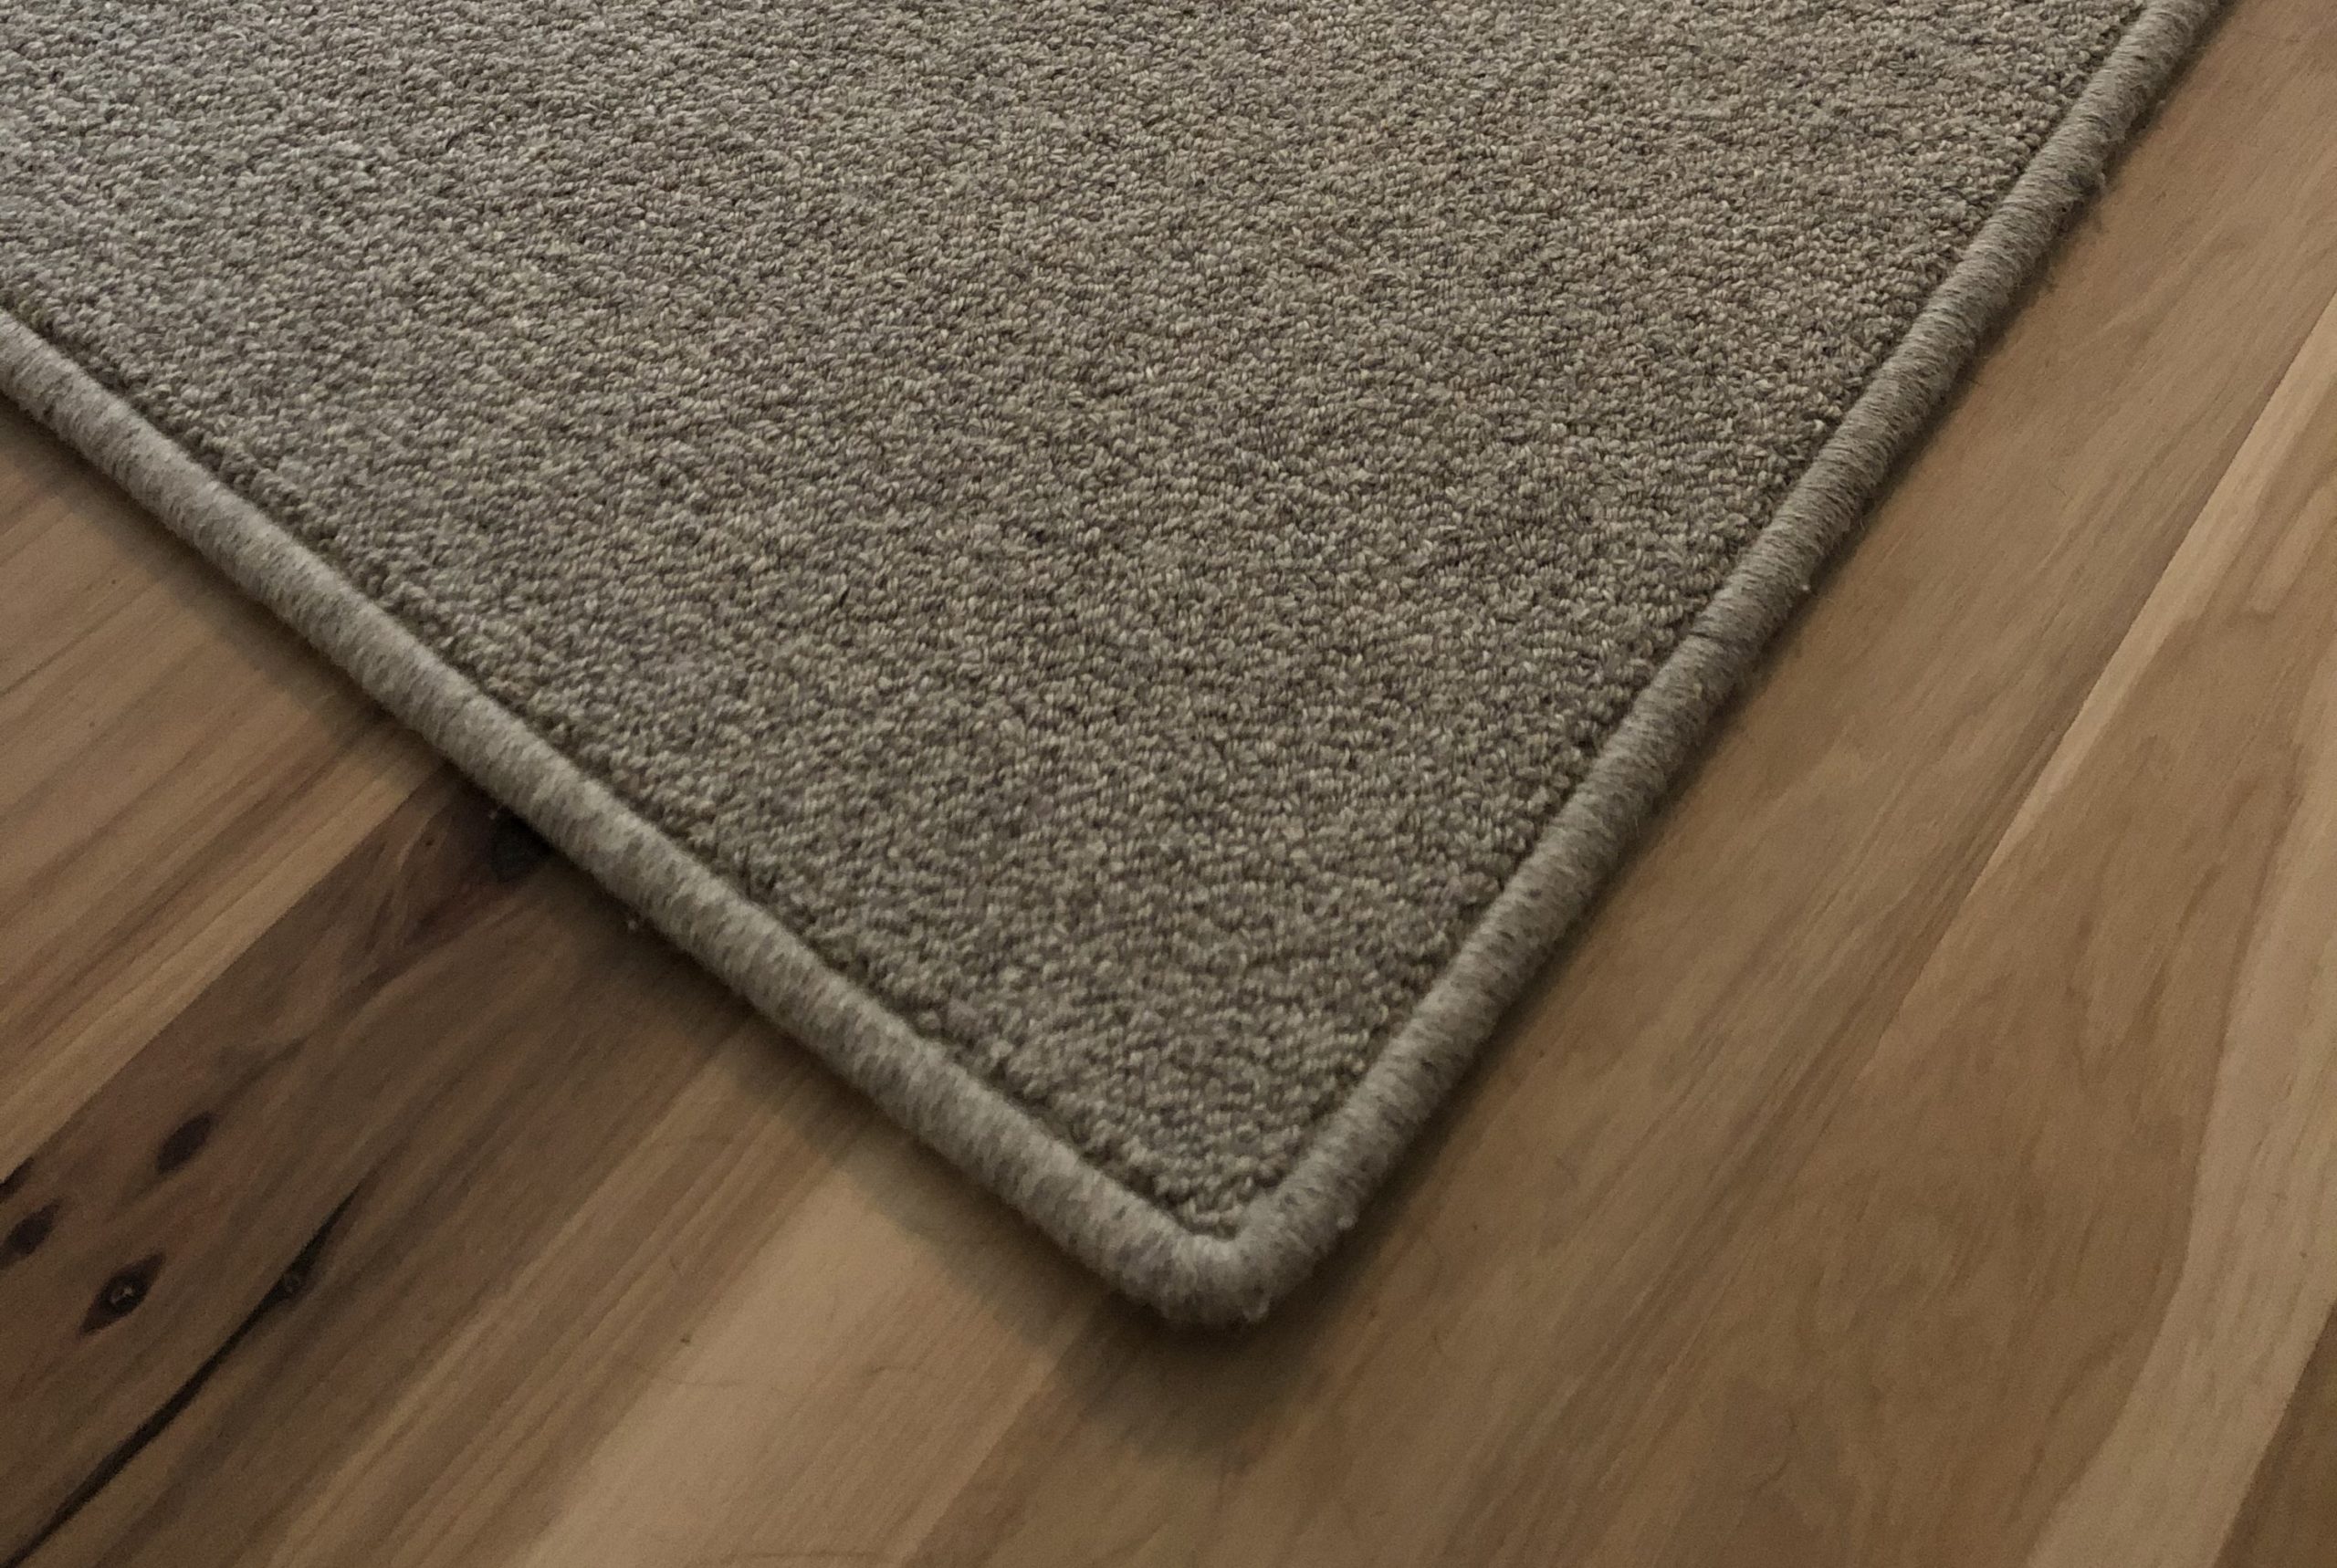 Non-toxic, chemical-free, natural wool rugs. Organic and Healthy